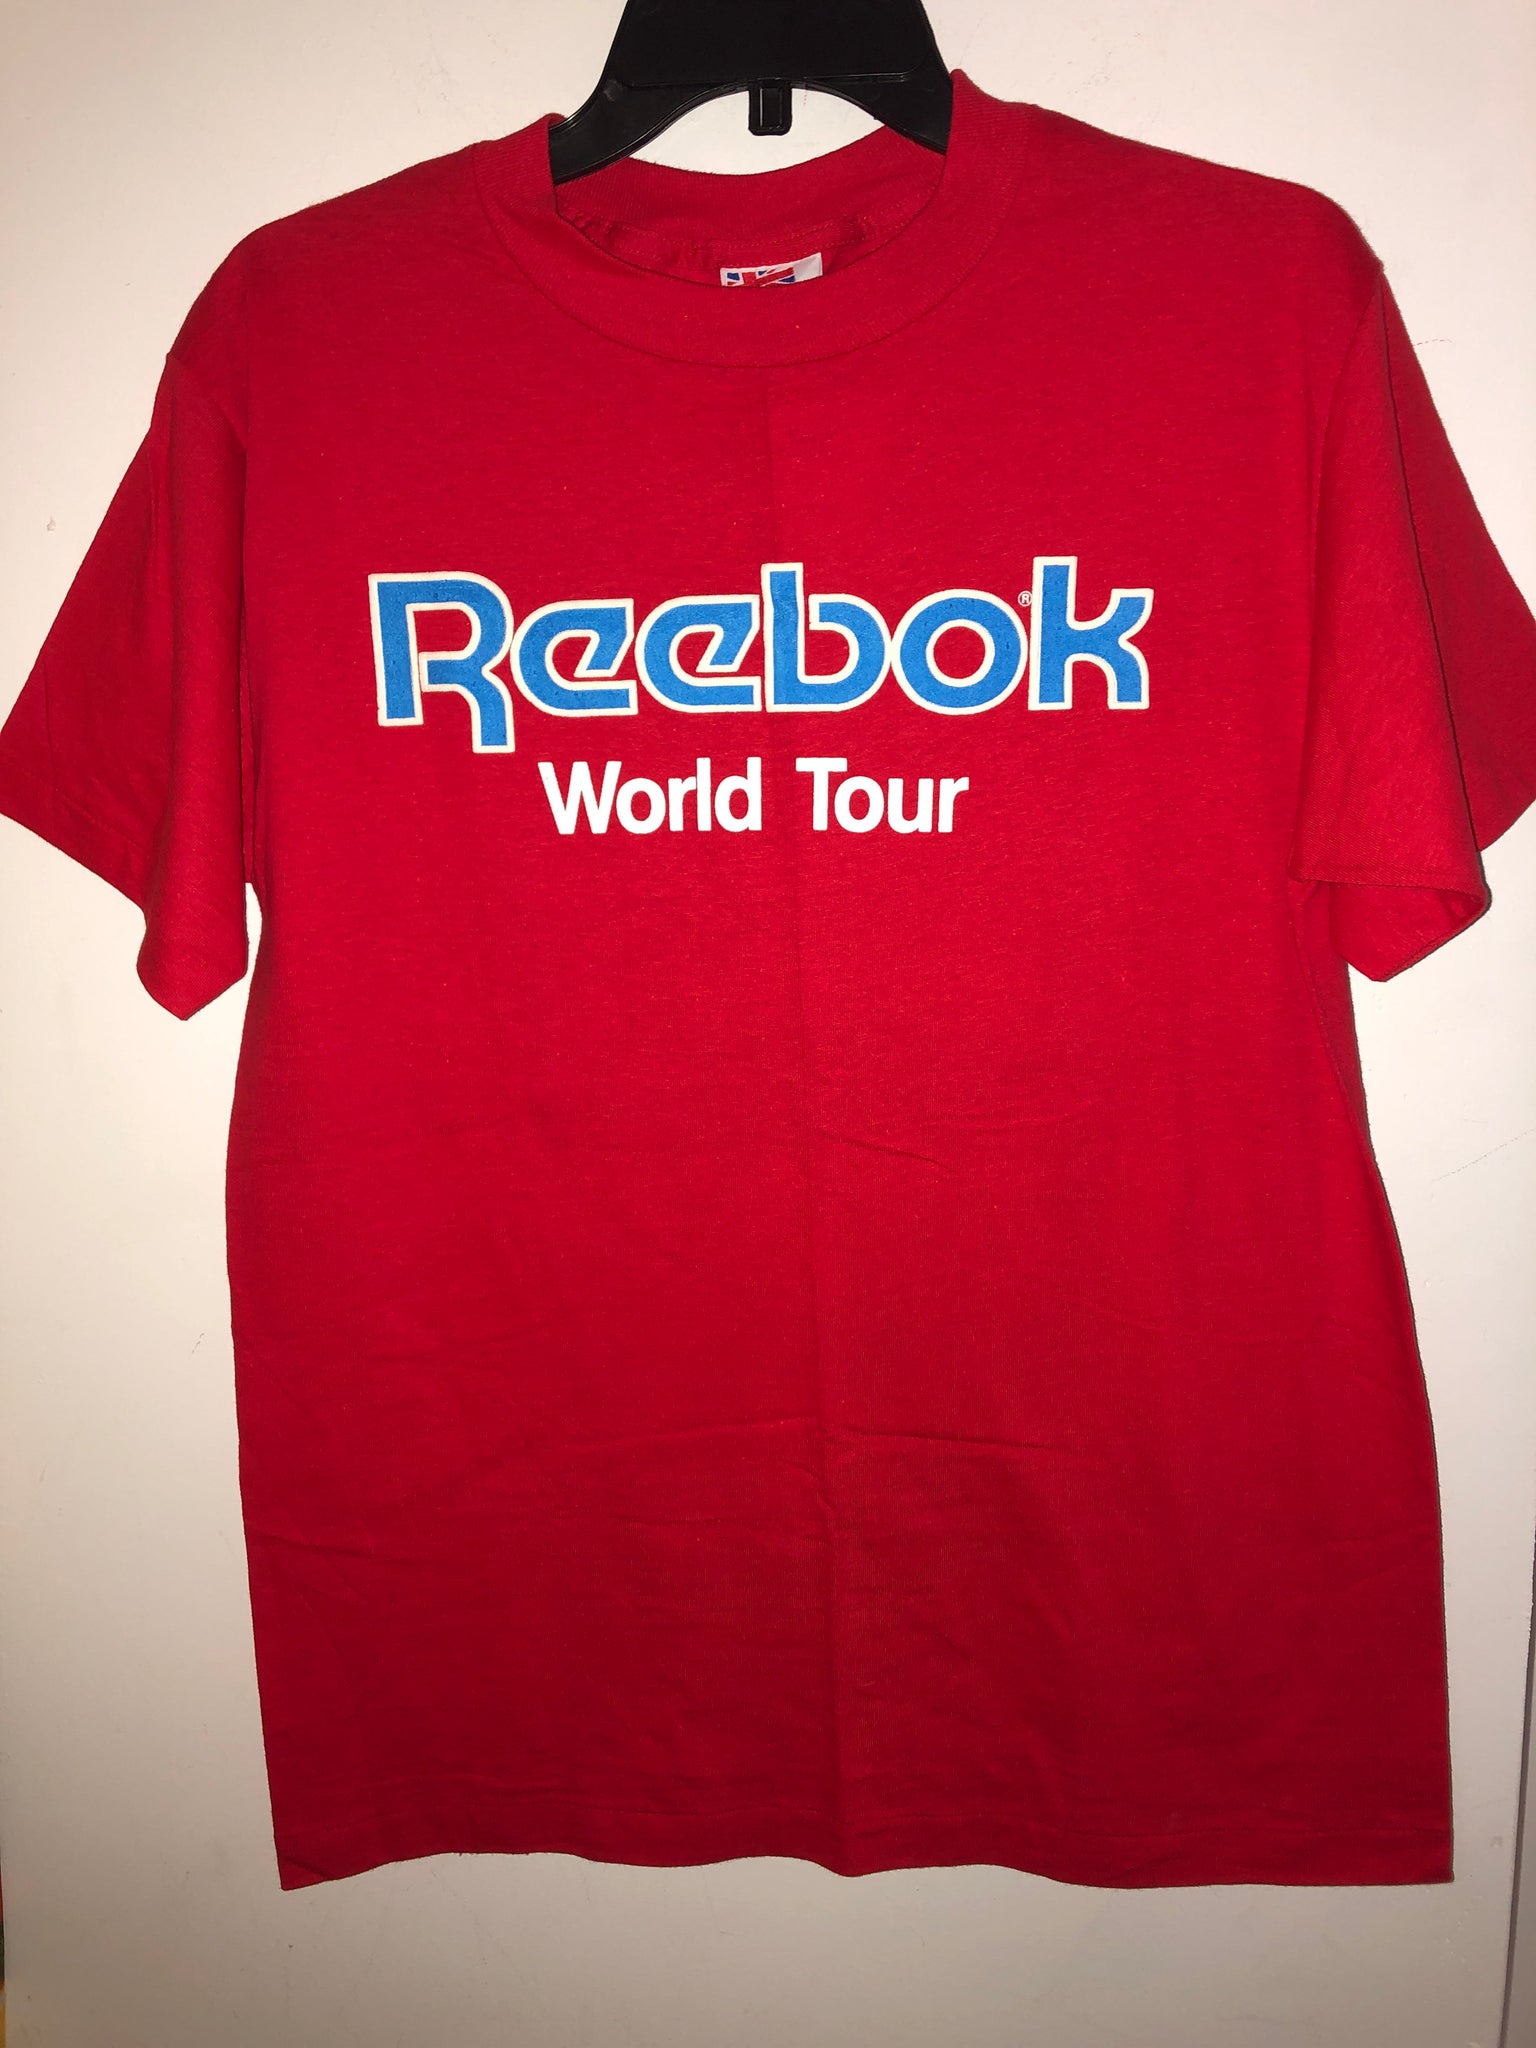 Deadstock Vintage 1988 Reebok World Tour Olympics T Shirt Fits a Medium Made in USA